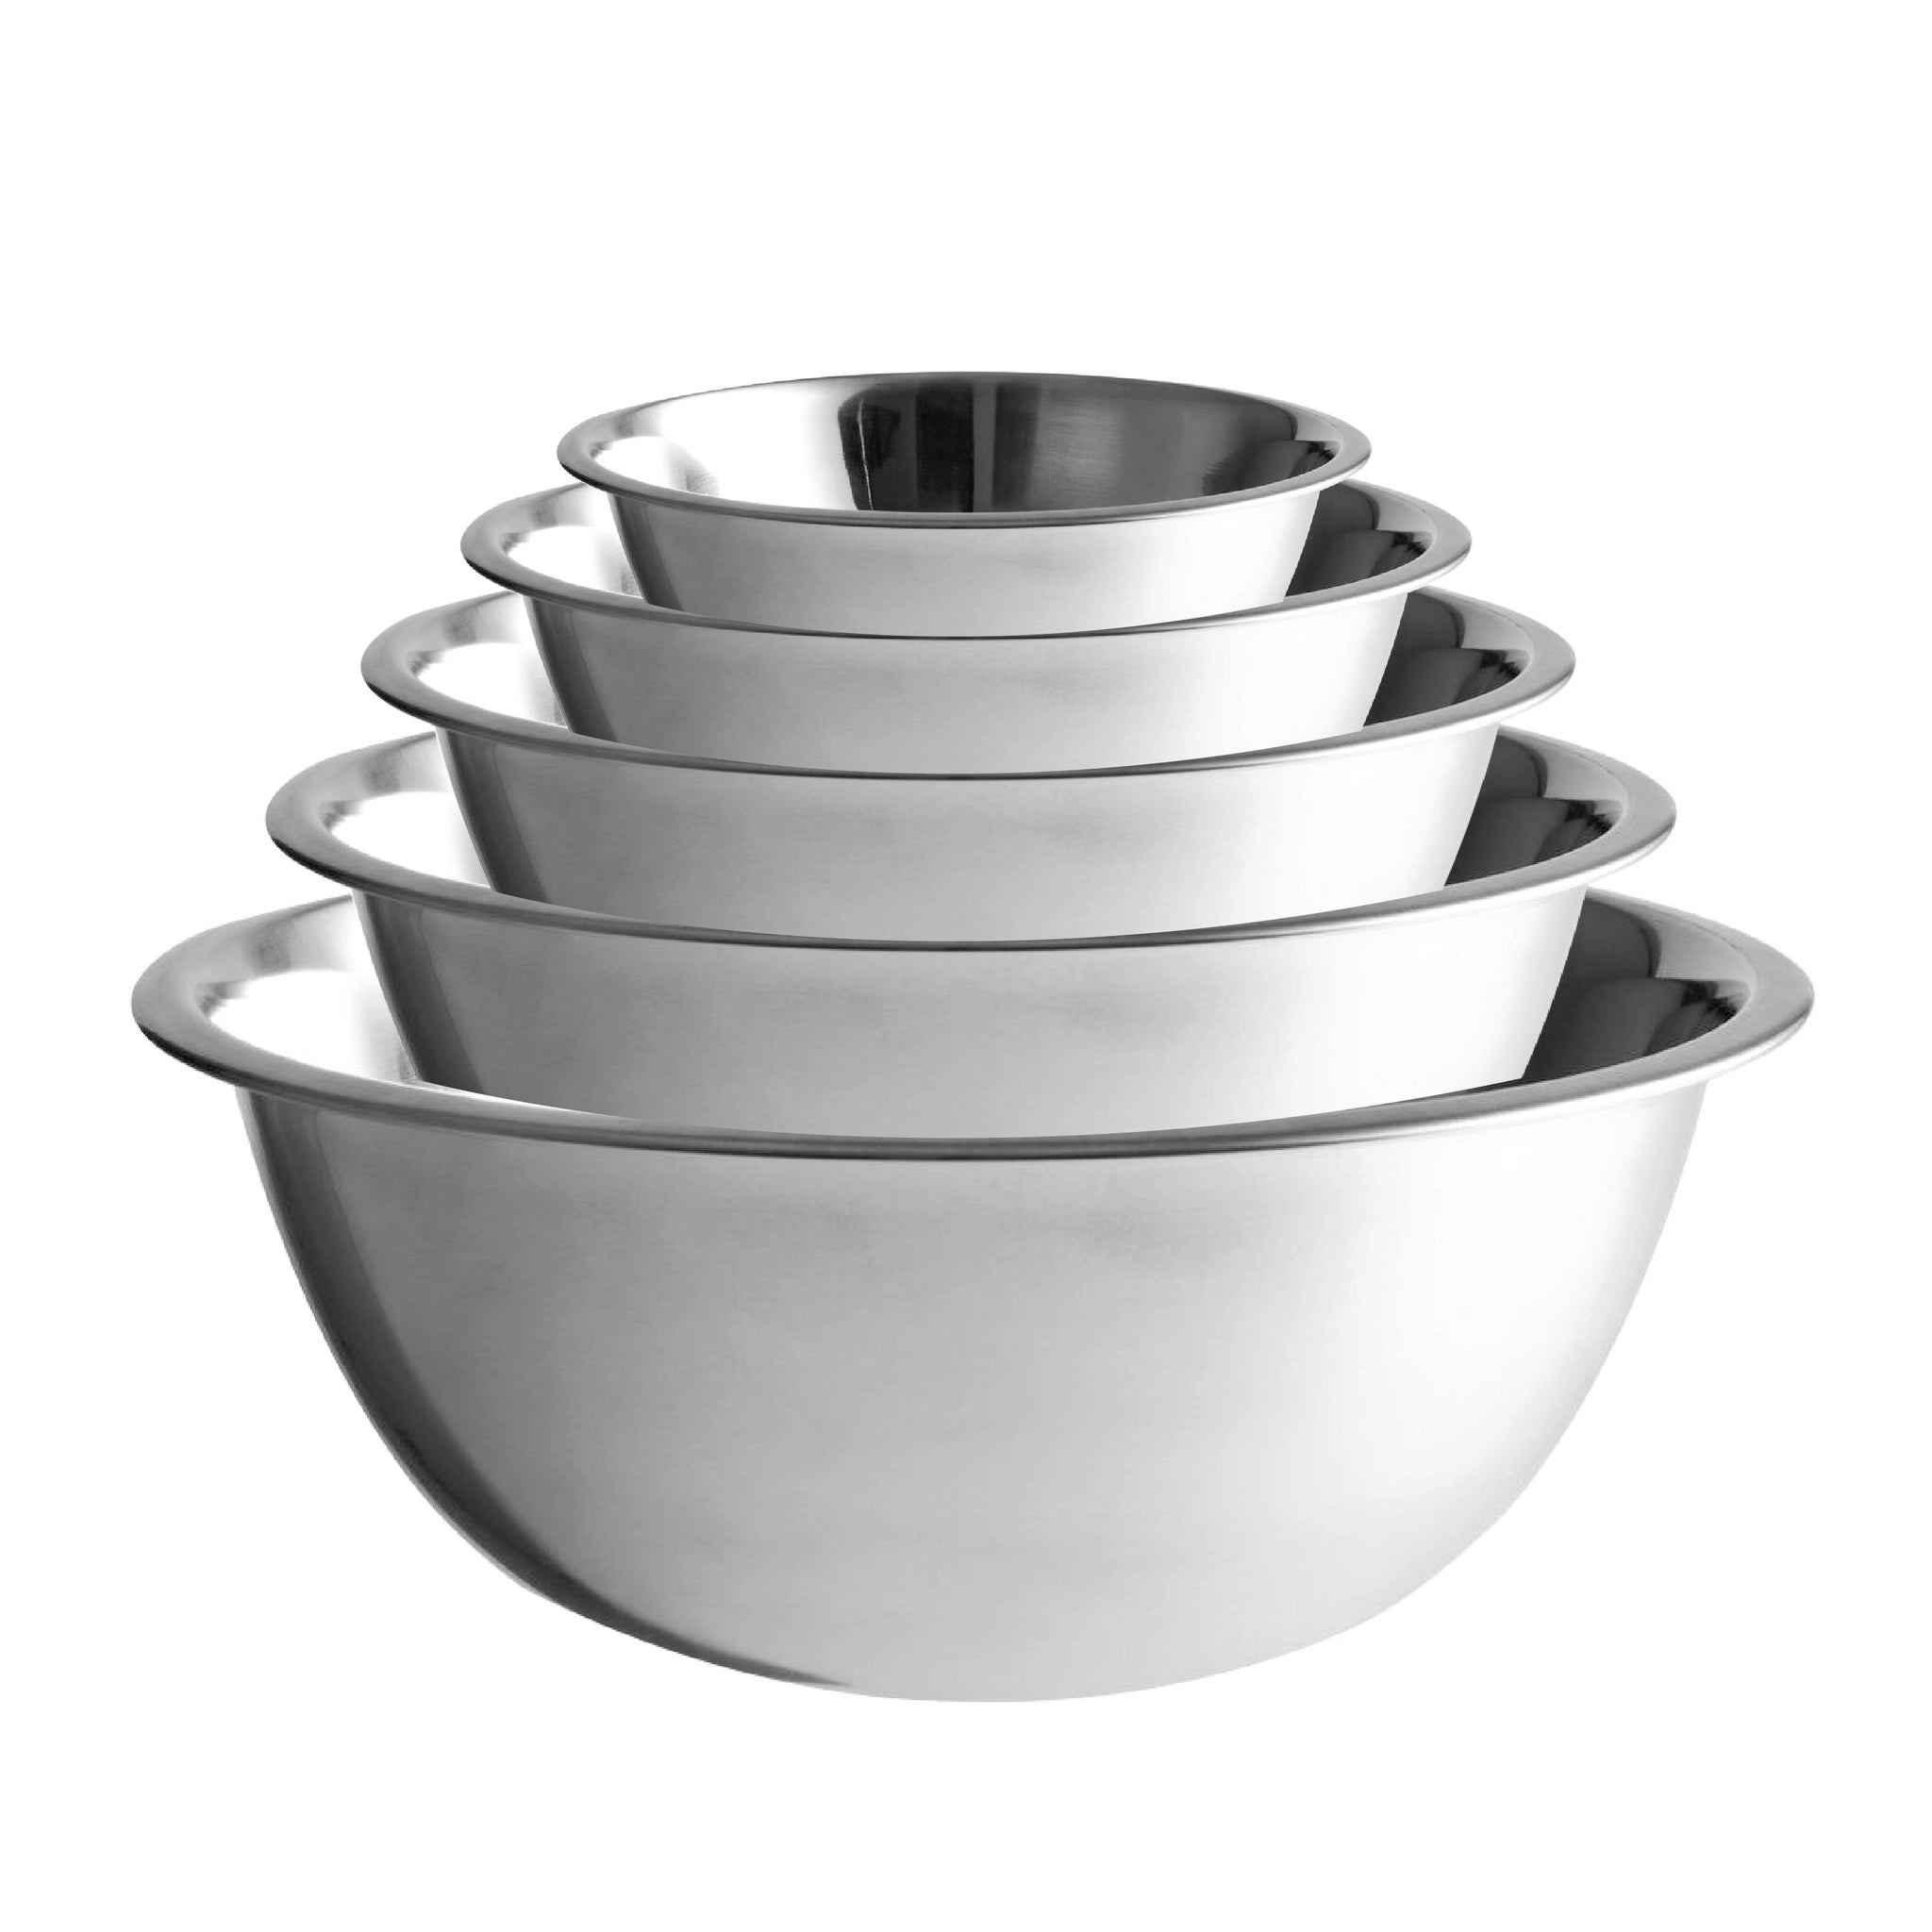 Guide to the Best Types of Mixing Bowls to Buy